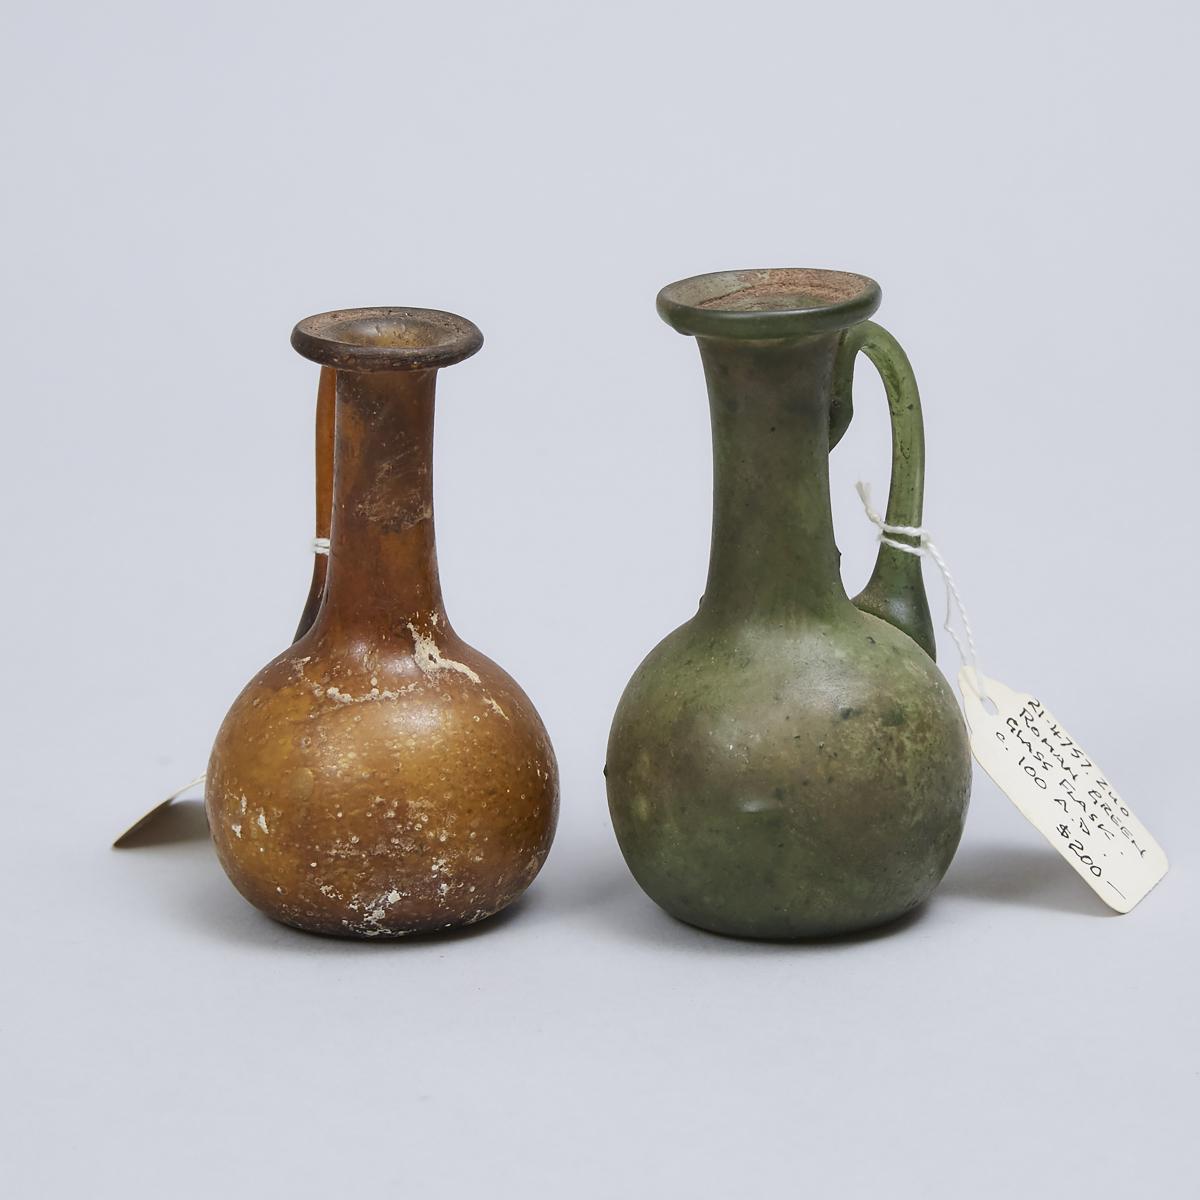 Two Roman Glass Juglets, 100-200 A.D., height 3.7 in — 9.5 cm - Image 5 of 5